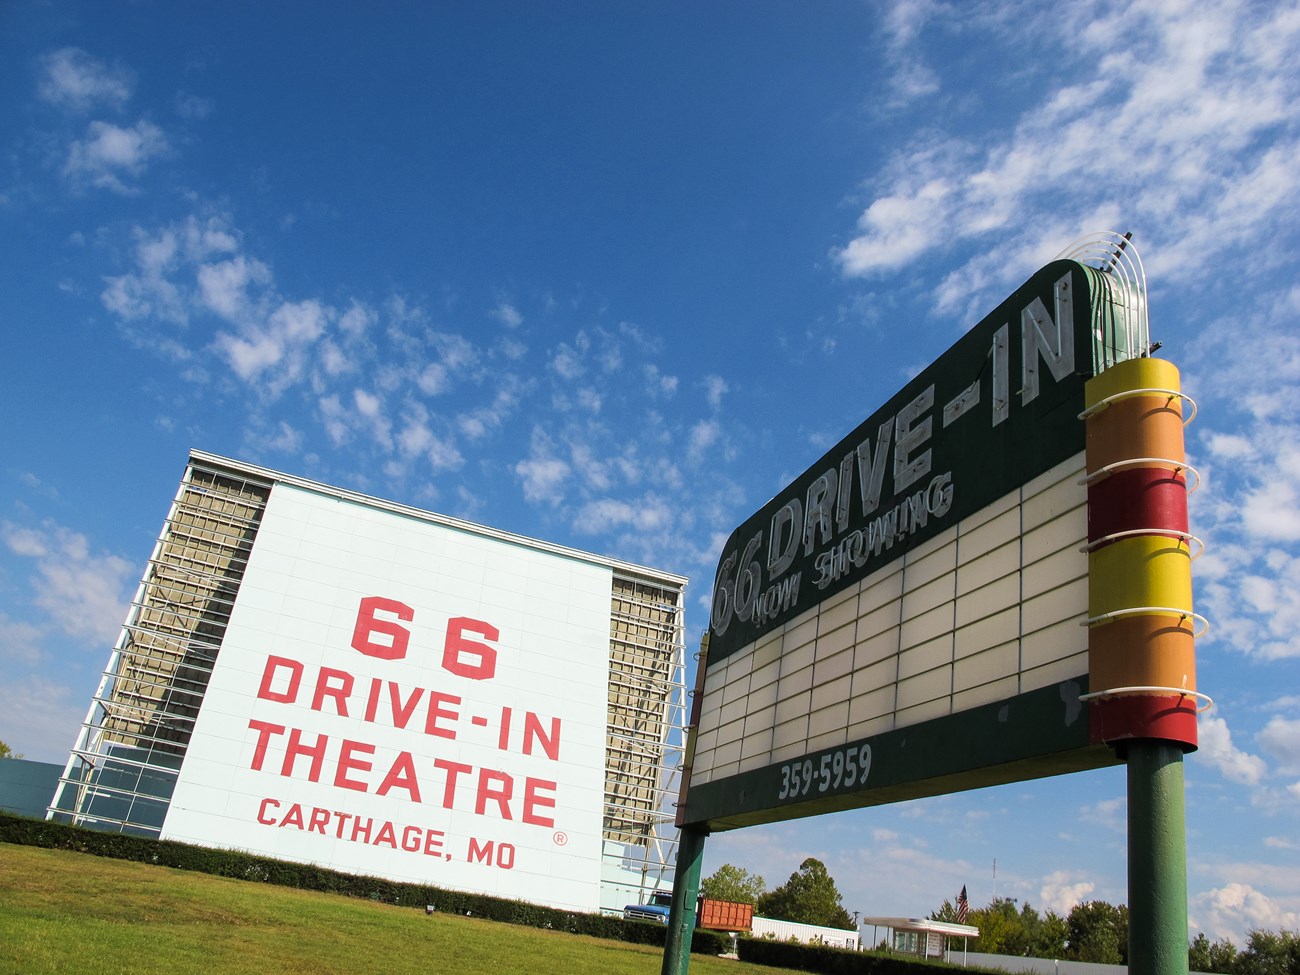 A large white board reads in red text "66 Drive-In Theatre Carthage, MO". Next to it is a black letter board sign.